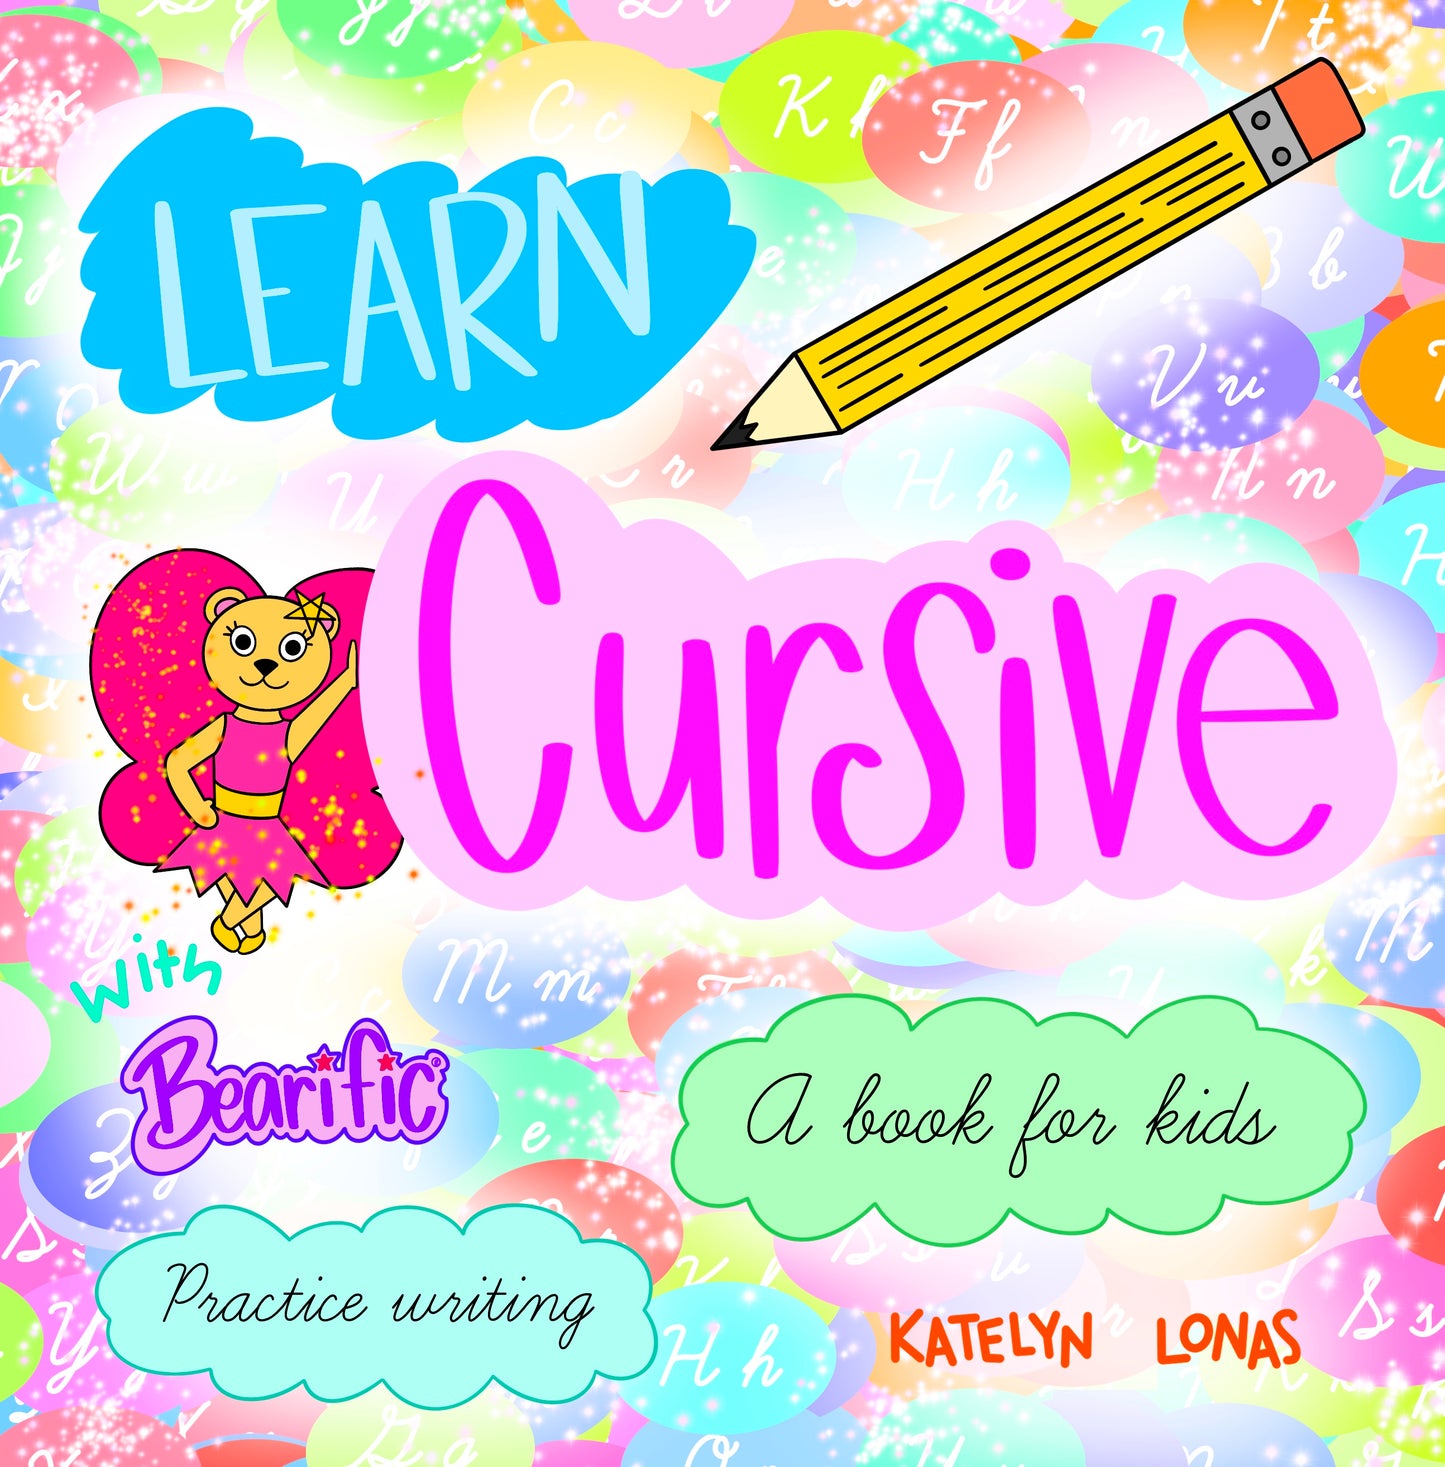 Learn Cursive with Bearific A book for kids Practice Writing